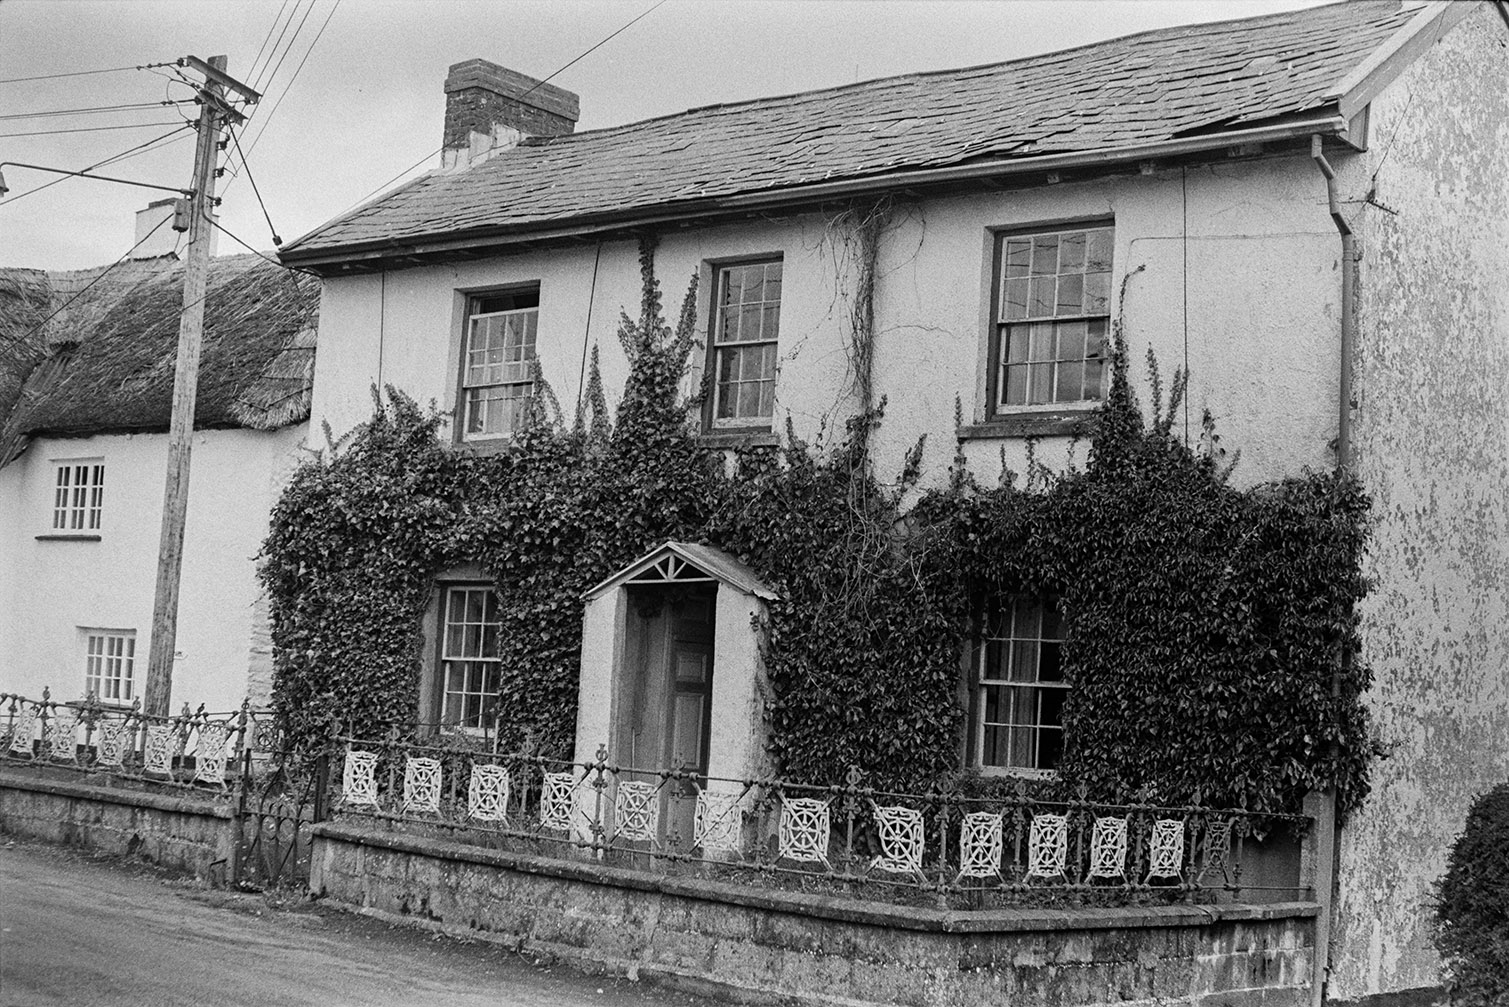 An ivy covered house, possibly at Rackenford, with decorative railings outside.